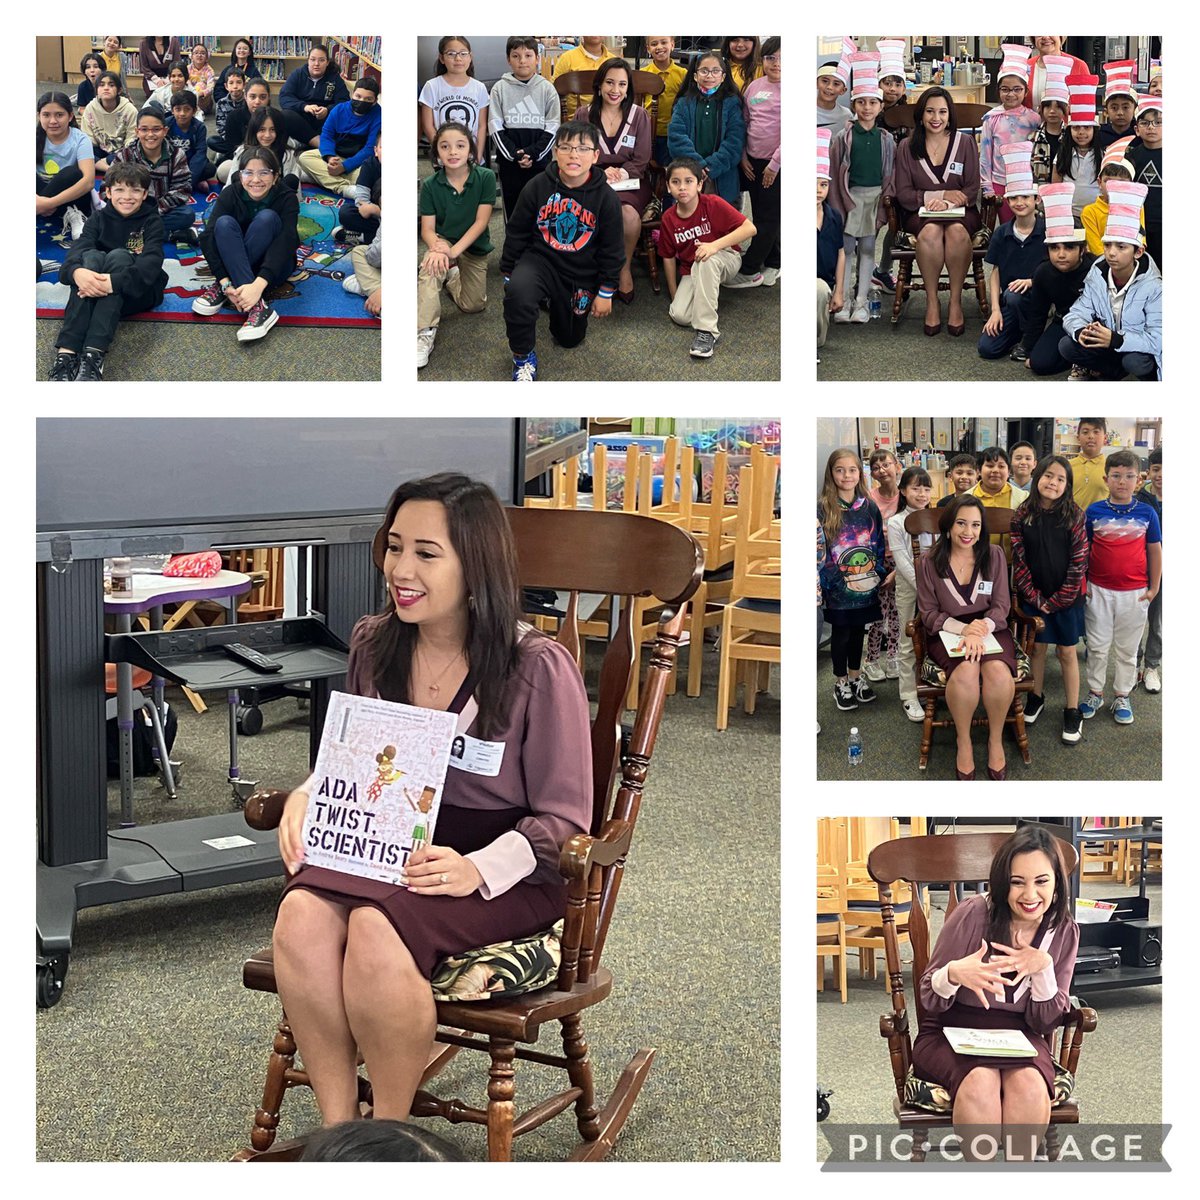 Thank you @MonicaKTSM , for coming to read to our students! #ReadOn #yisdreads #ReadAcrossAmericaWeek @EdgemereSchool @YISDLibServices @YsletaISD @Gmaria1G @catherinedoc12 @BrendaChR1 @_IreneAhumada @edgisliteracy @TDS_Library @rveslibrary @EKIS_LIBRARY